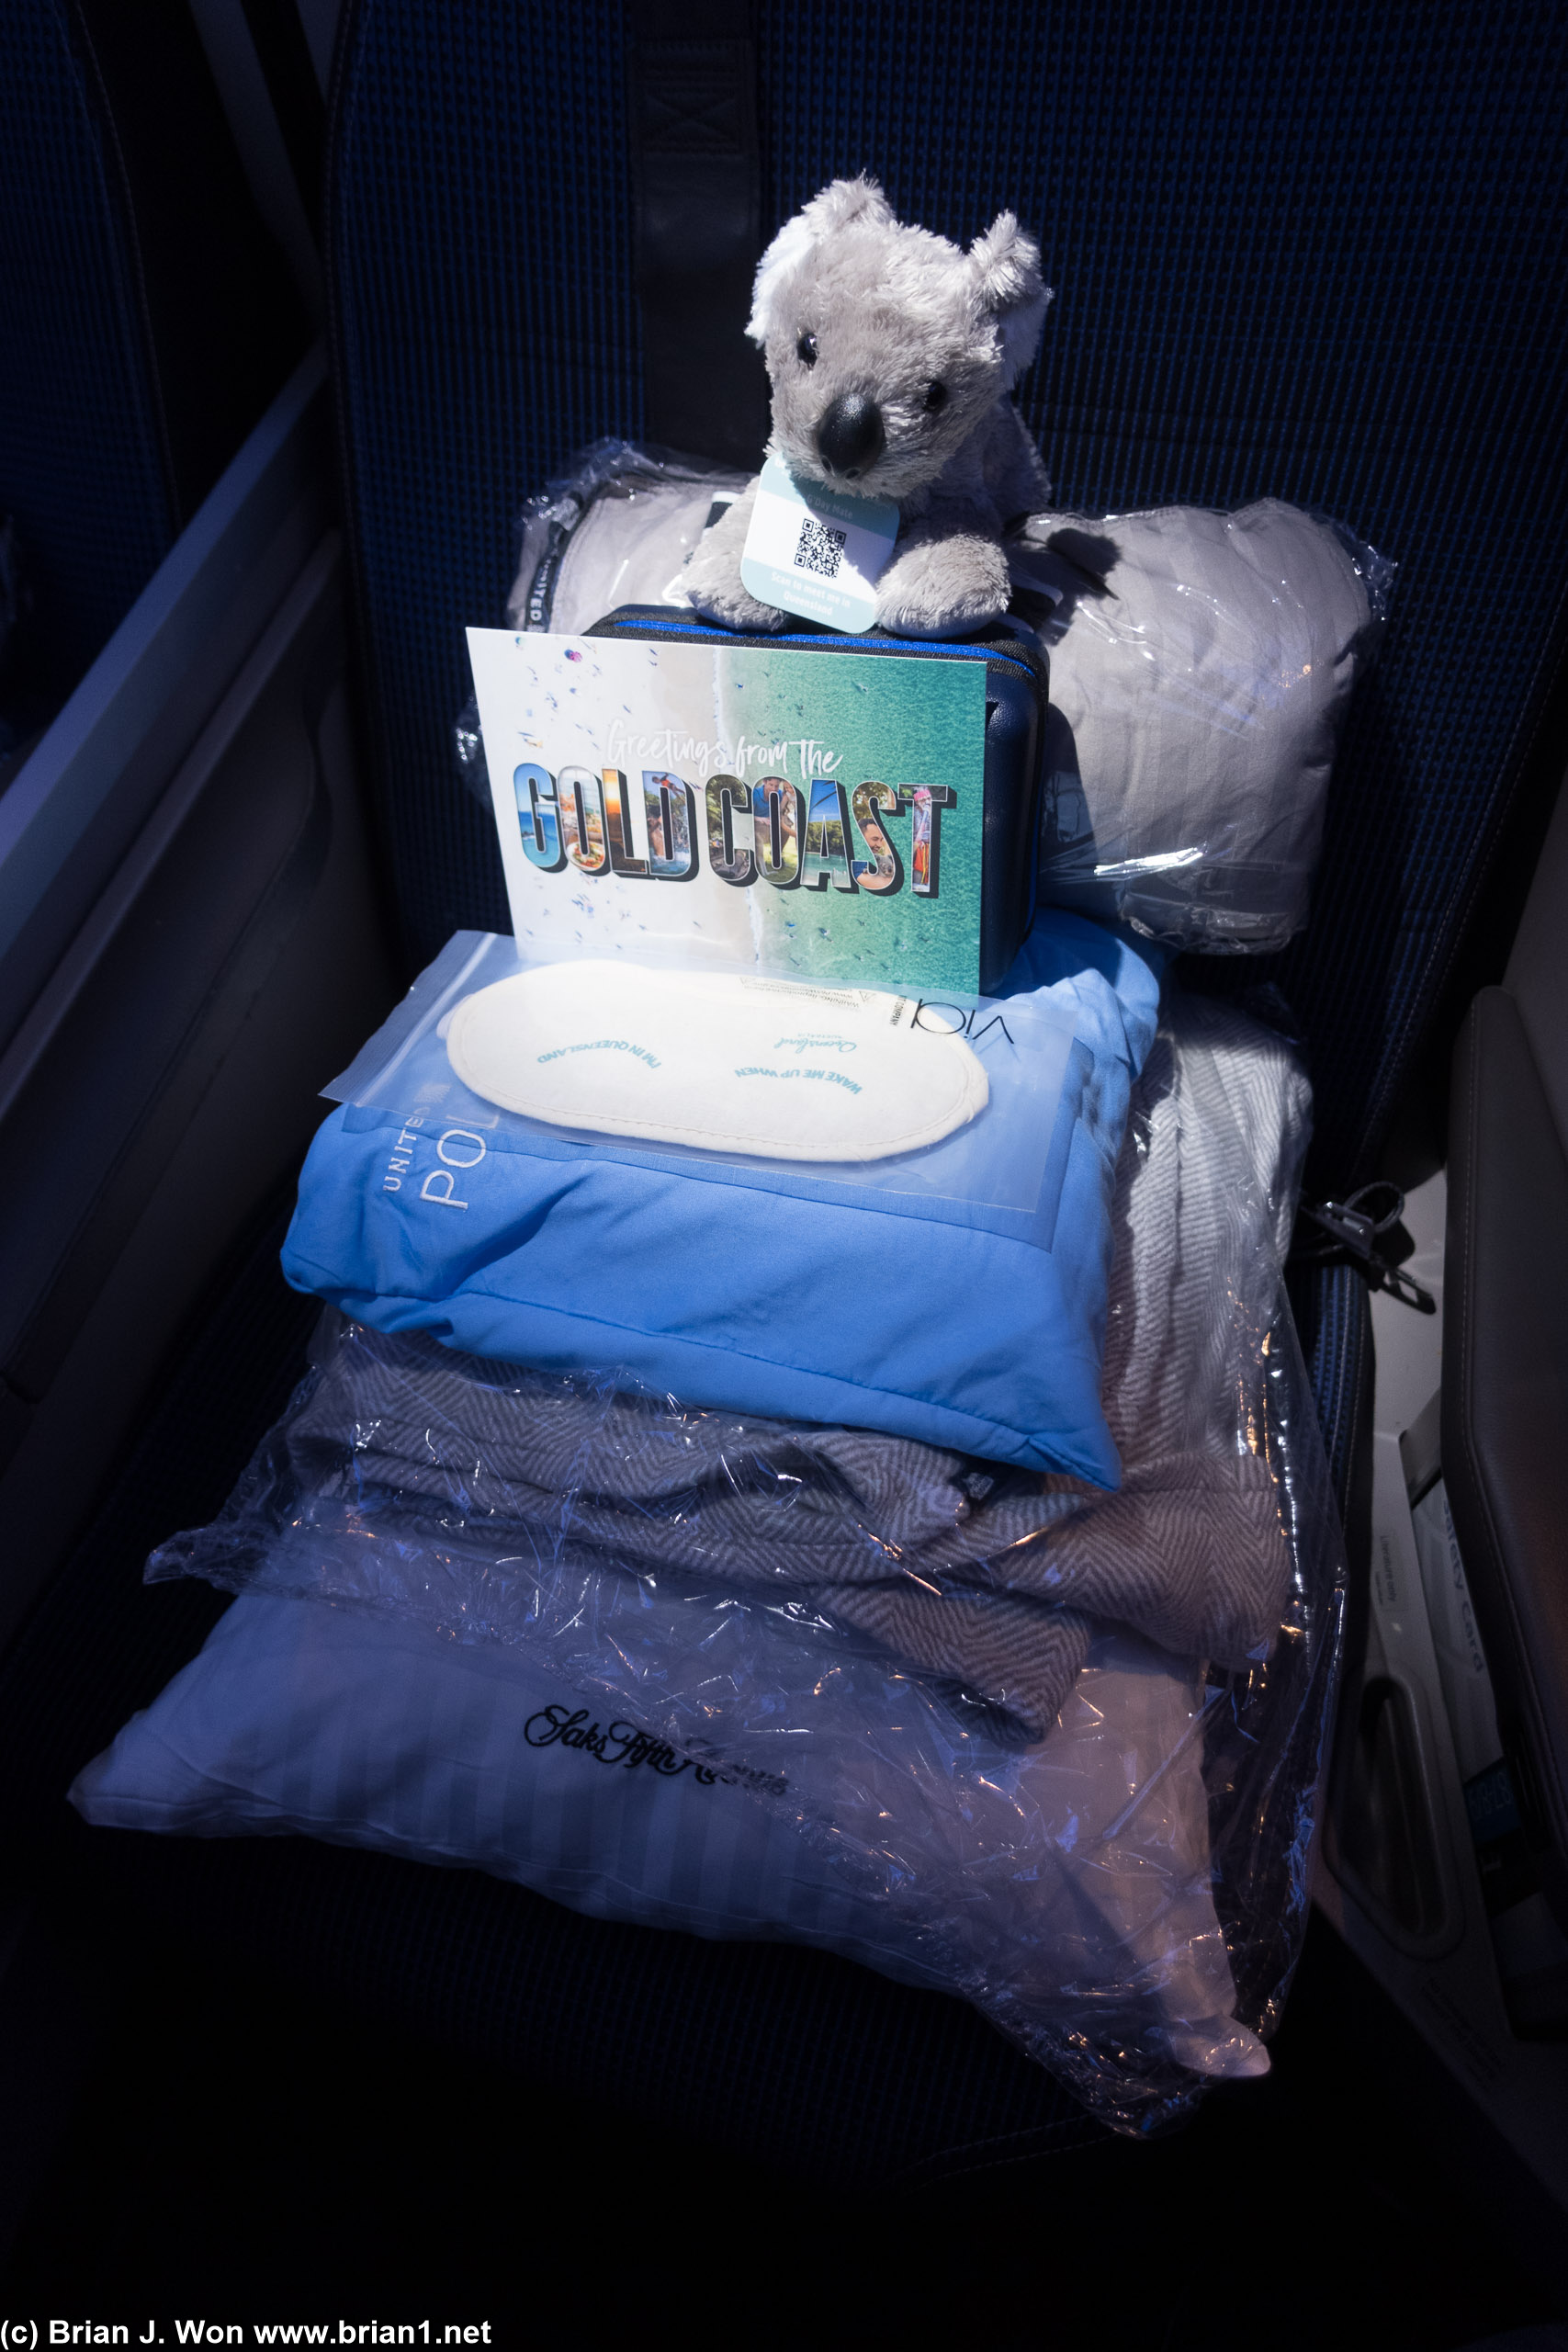 Polaris amenities at the seat, including an inaugural flight special koala, Gold Coast tourism flyer, and eye mask.